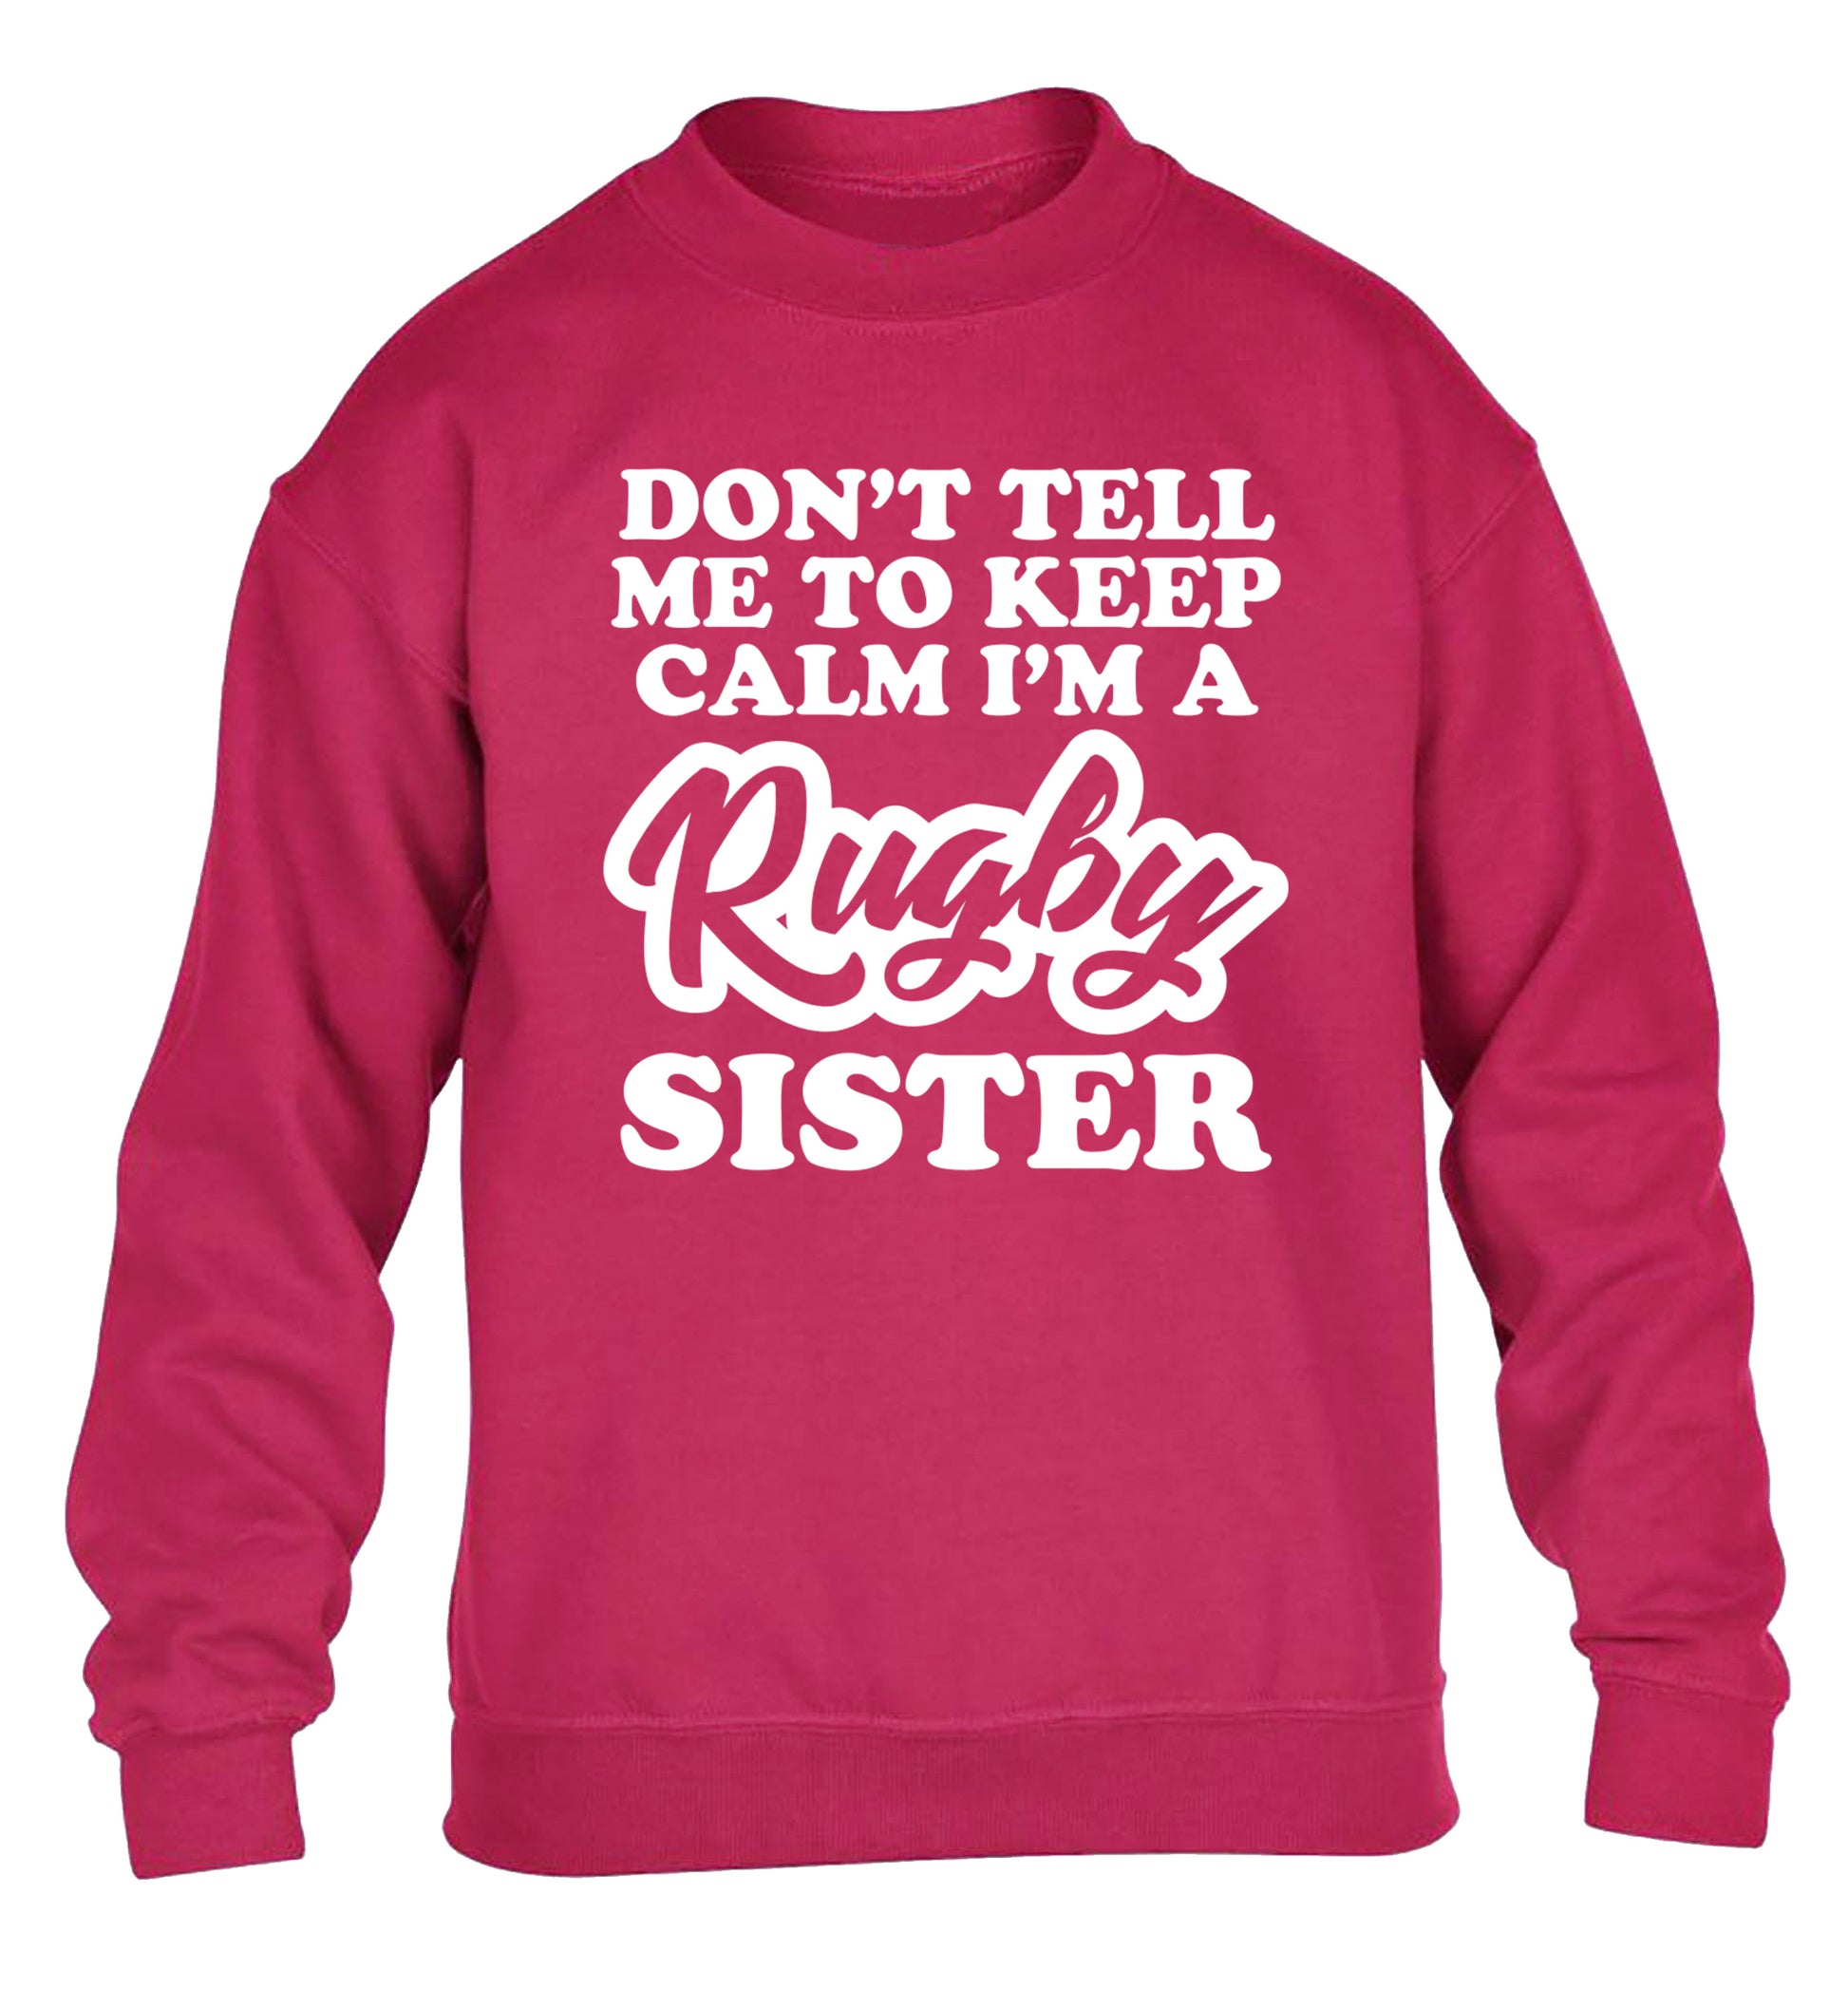 Don't tell me keep calm I'm a rugby sister children's pink sweater 12-13 Years